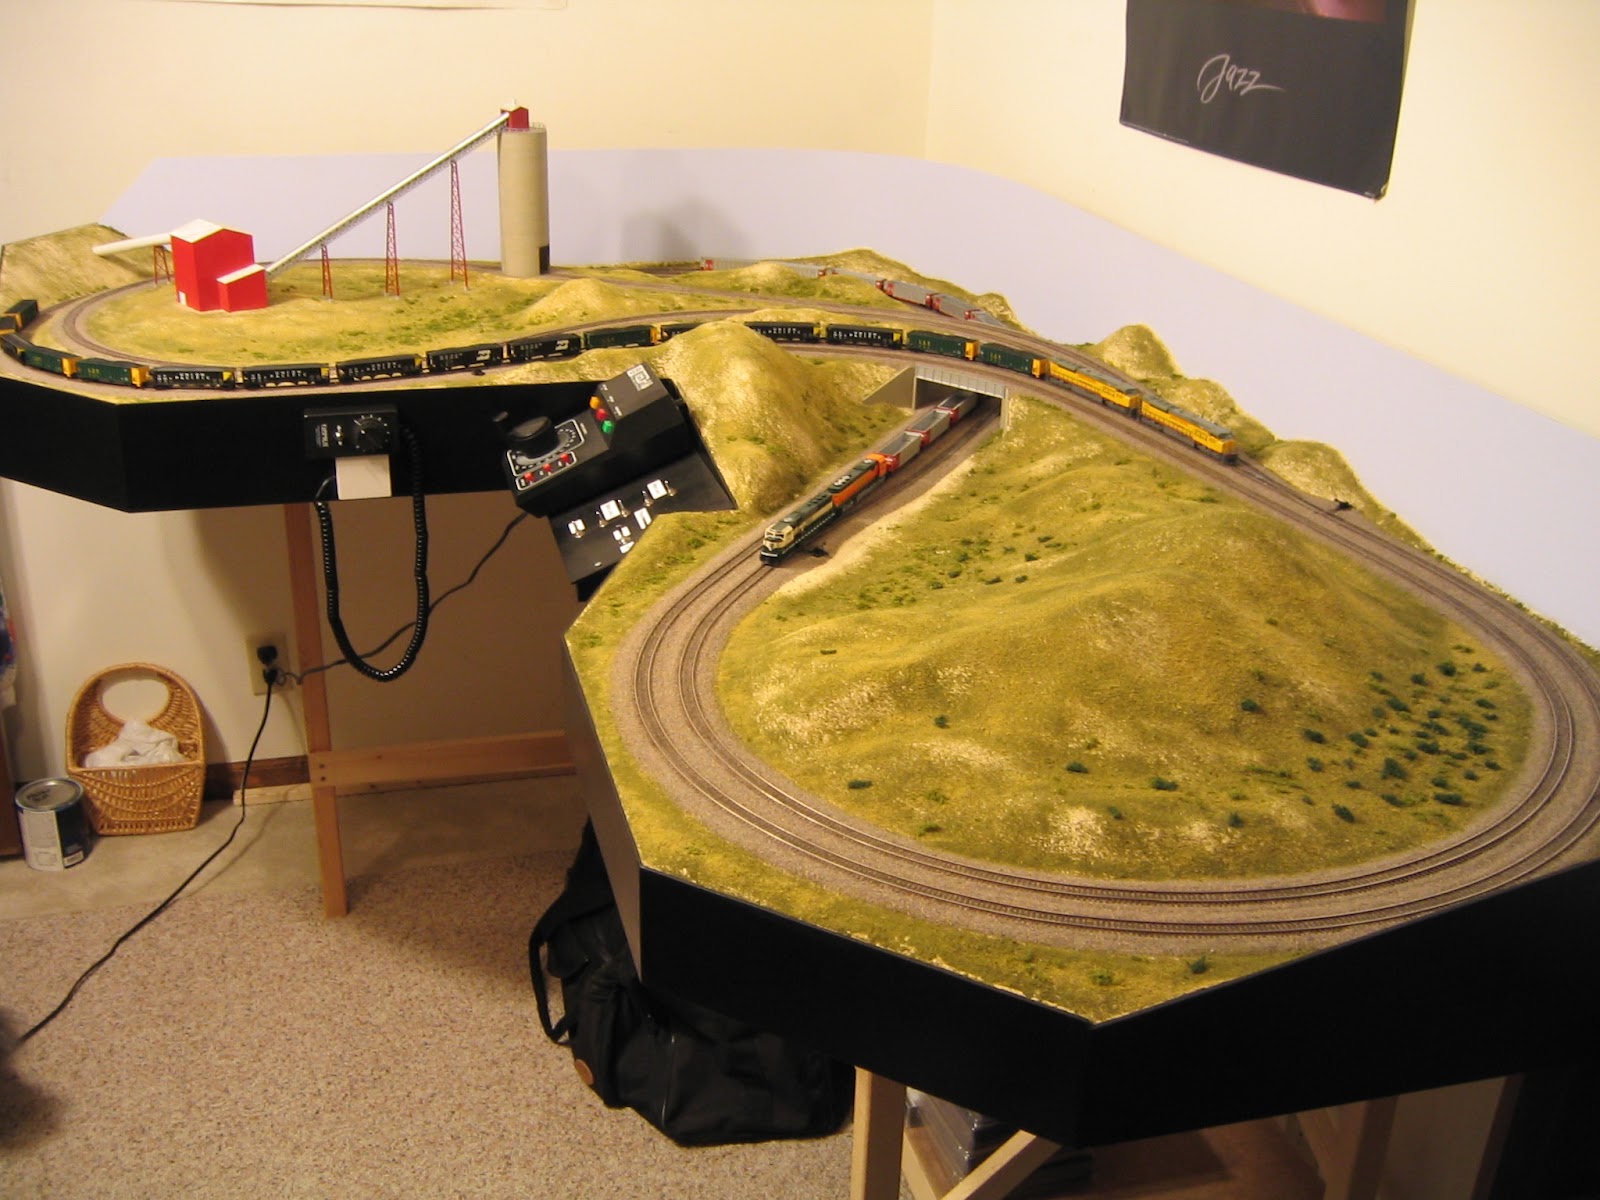 Scale Addiction: More Photos of my First N Scale Model Railroad